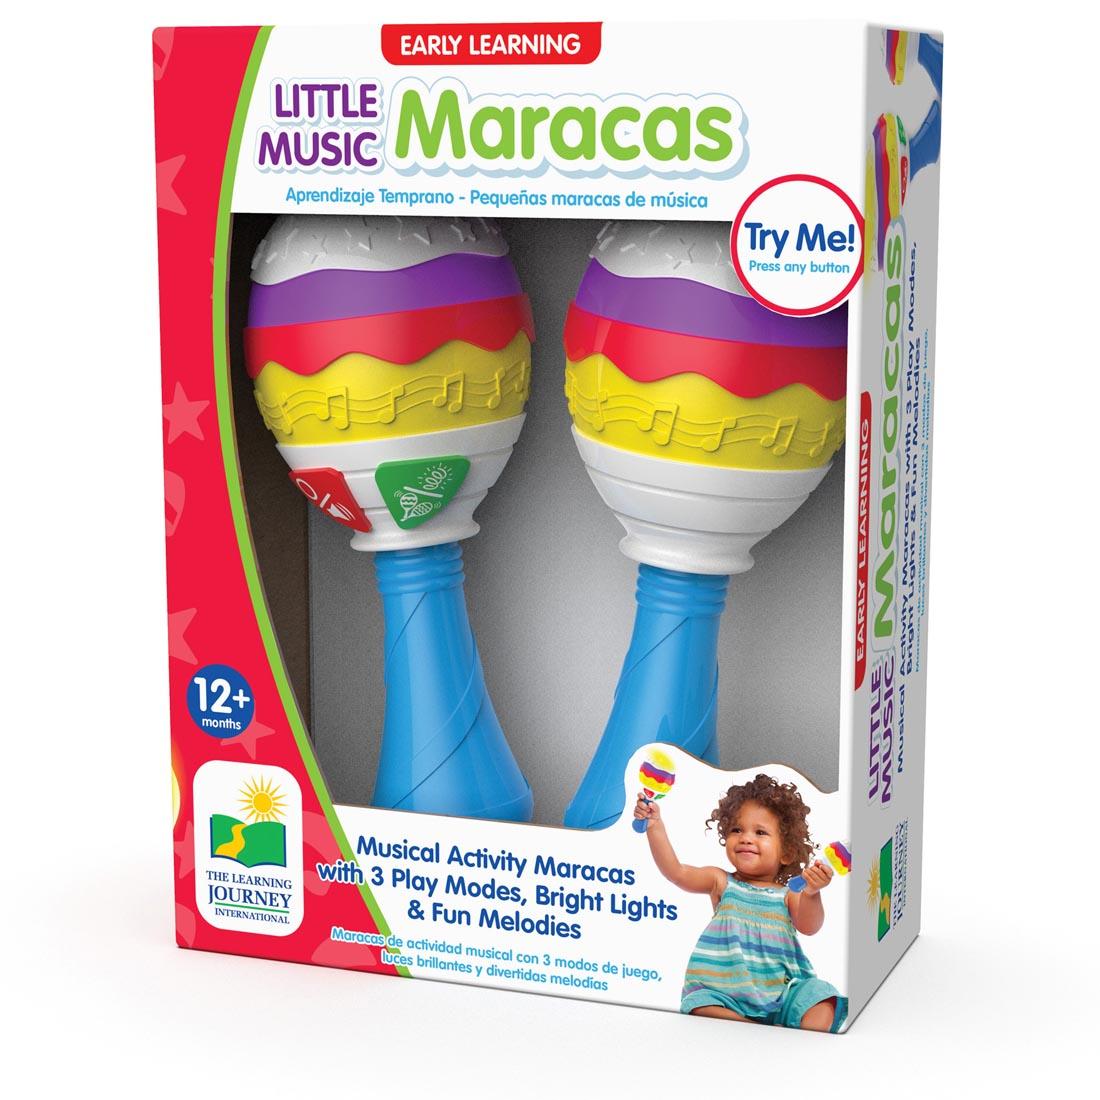 Little Music Maracas by The Learning Journey